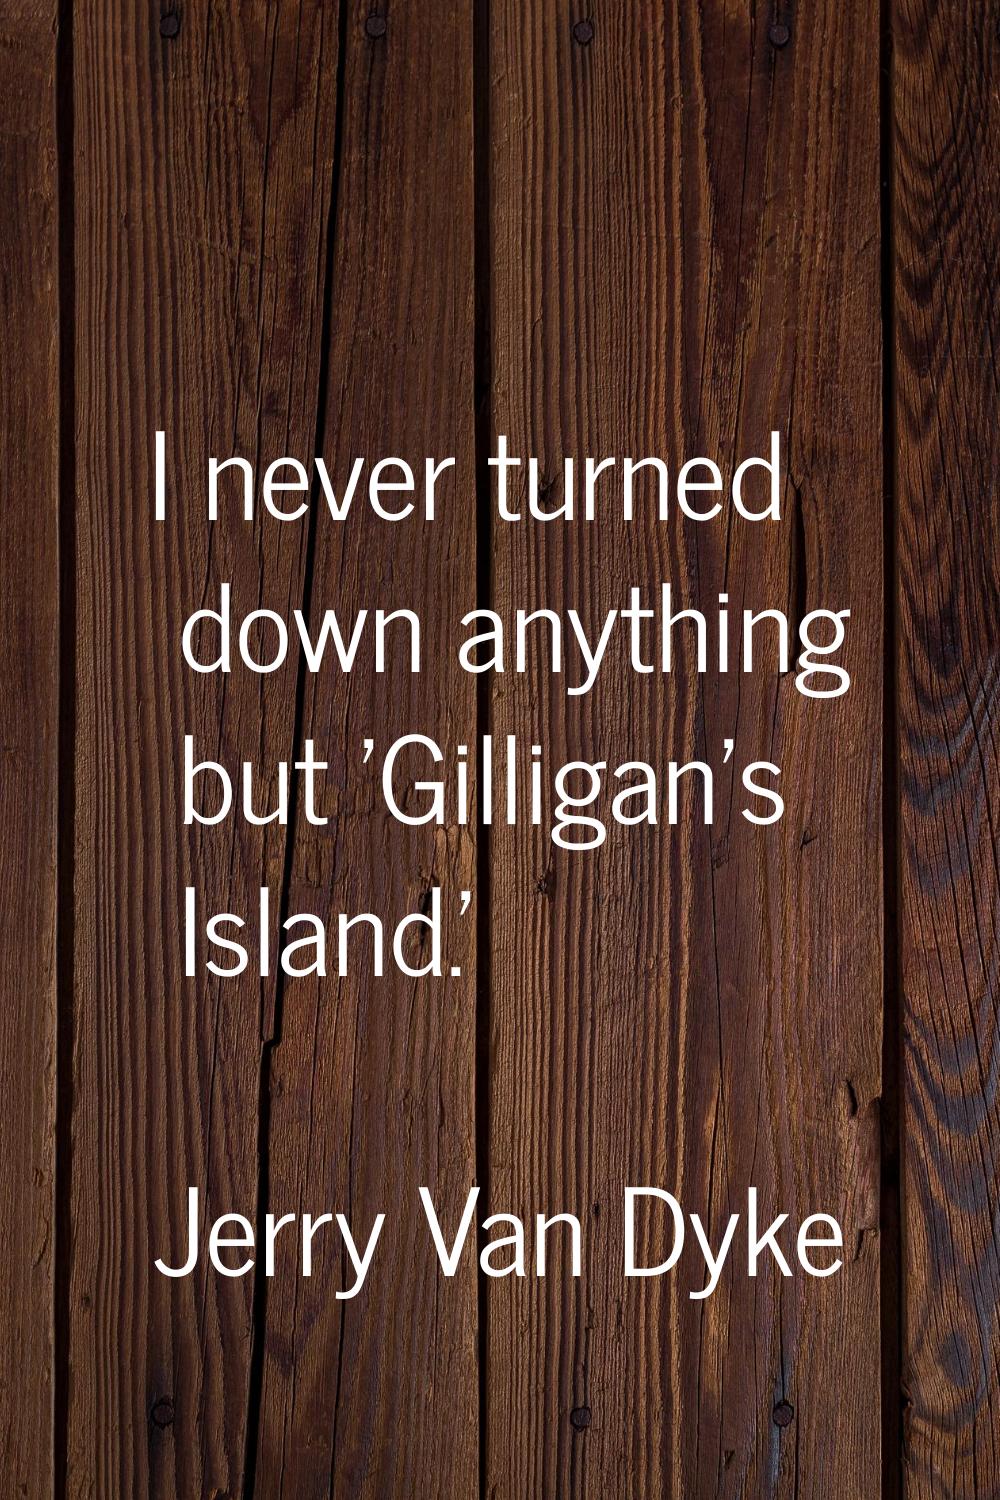 I never turned down anything but 'Gilligan's Island.'